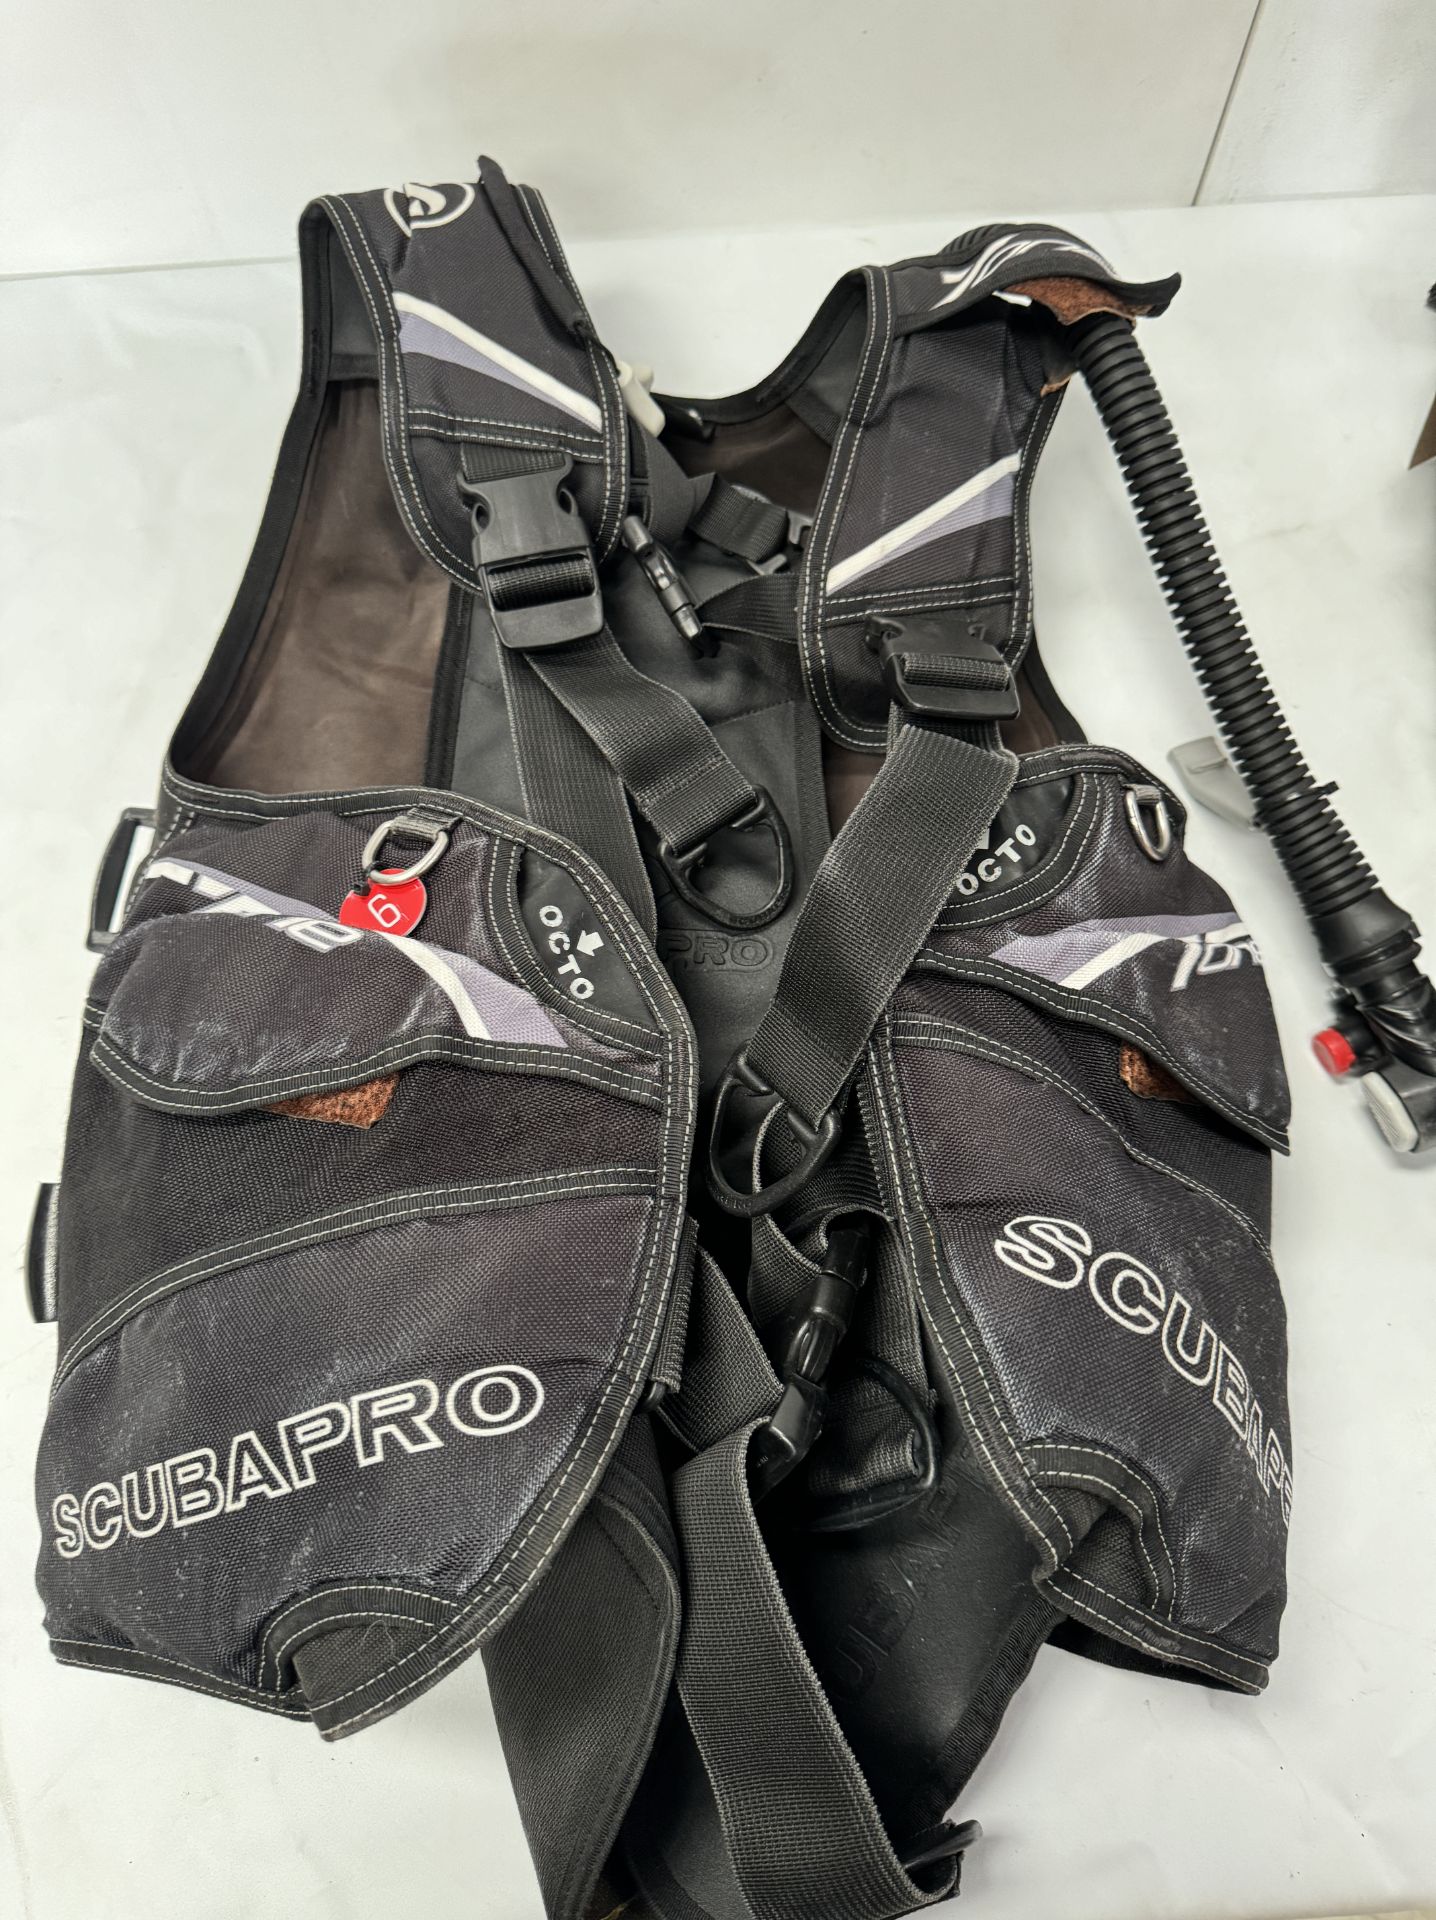 Scuba Pro, Seaquest, Zeagle Aqualung Buoyancy Compensator (Location: Brentwood. Please Refer to - Image 2 of 8